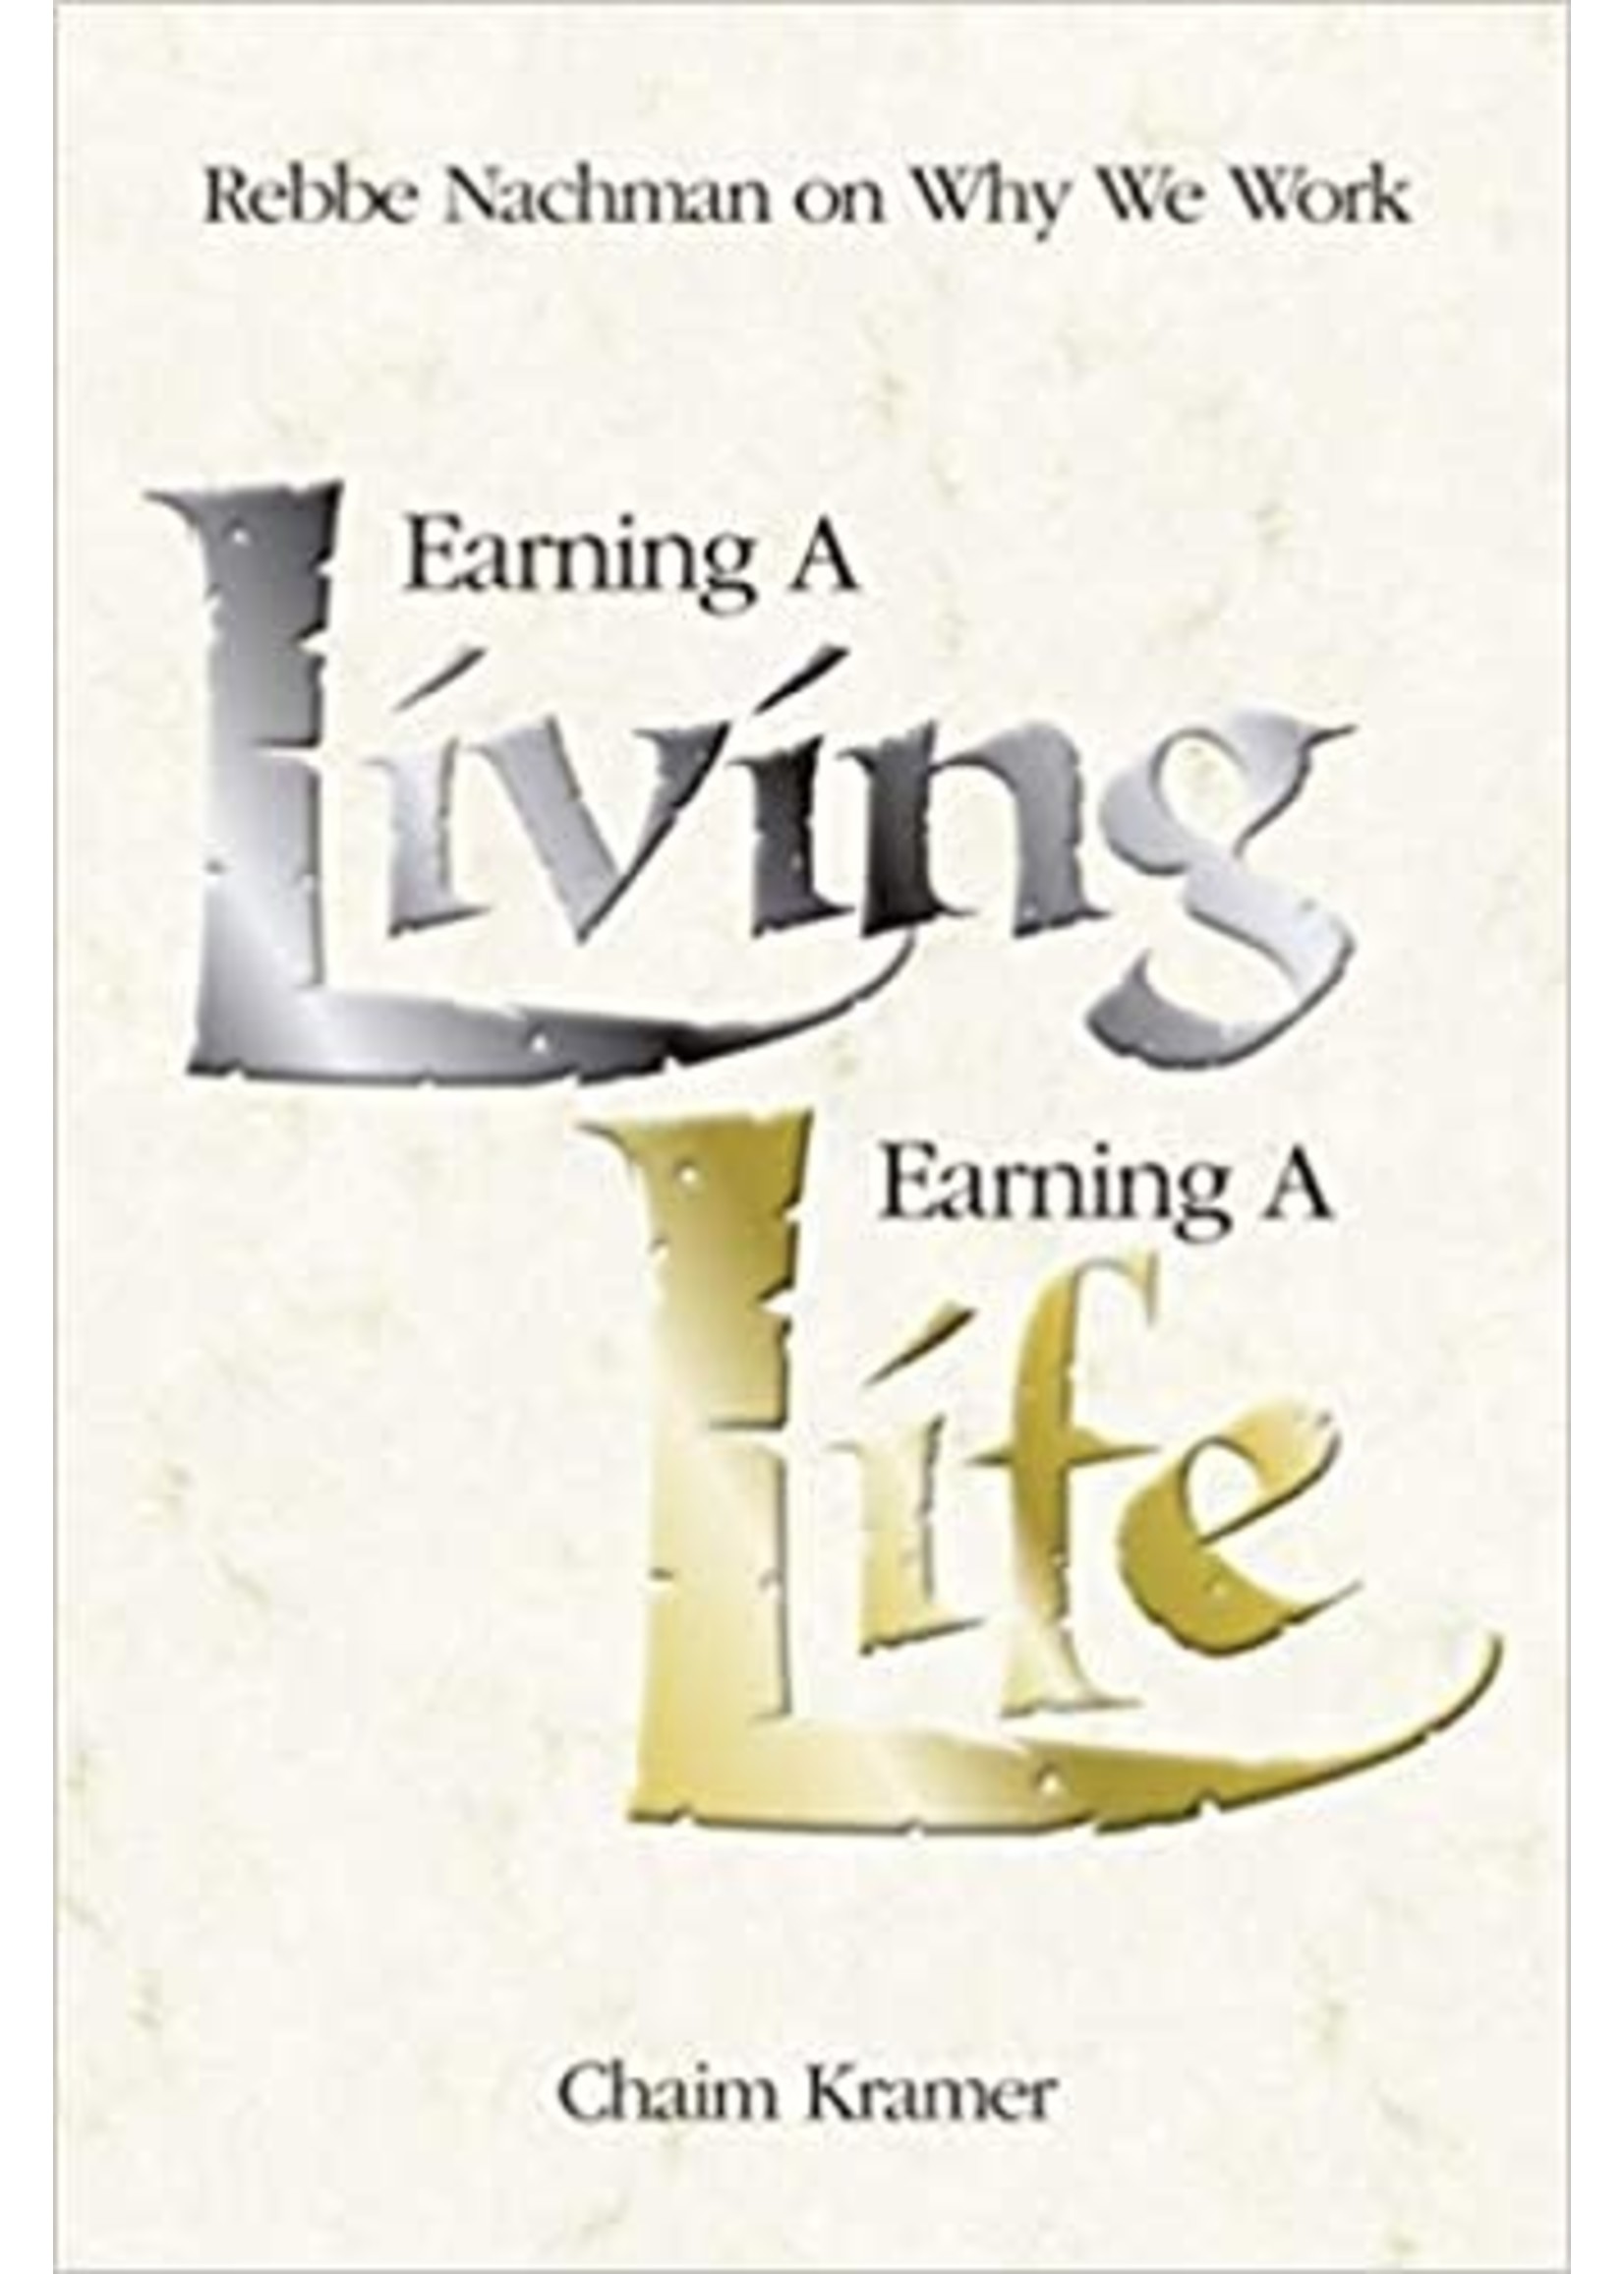 EARNING A LIVING, EARNING A